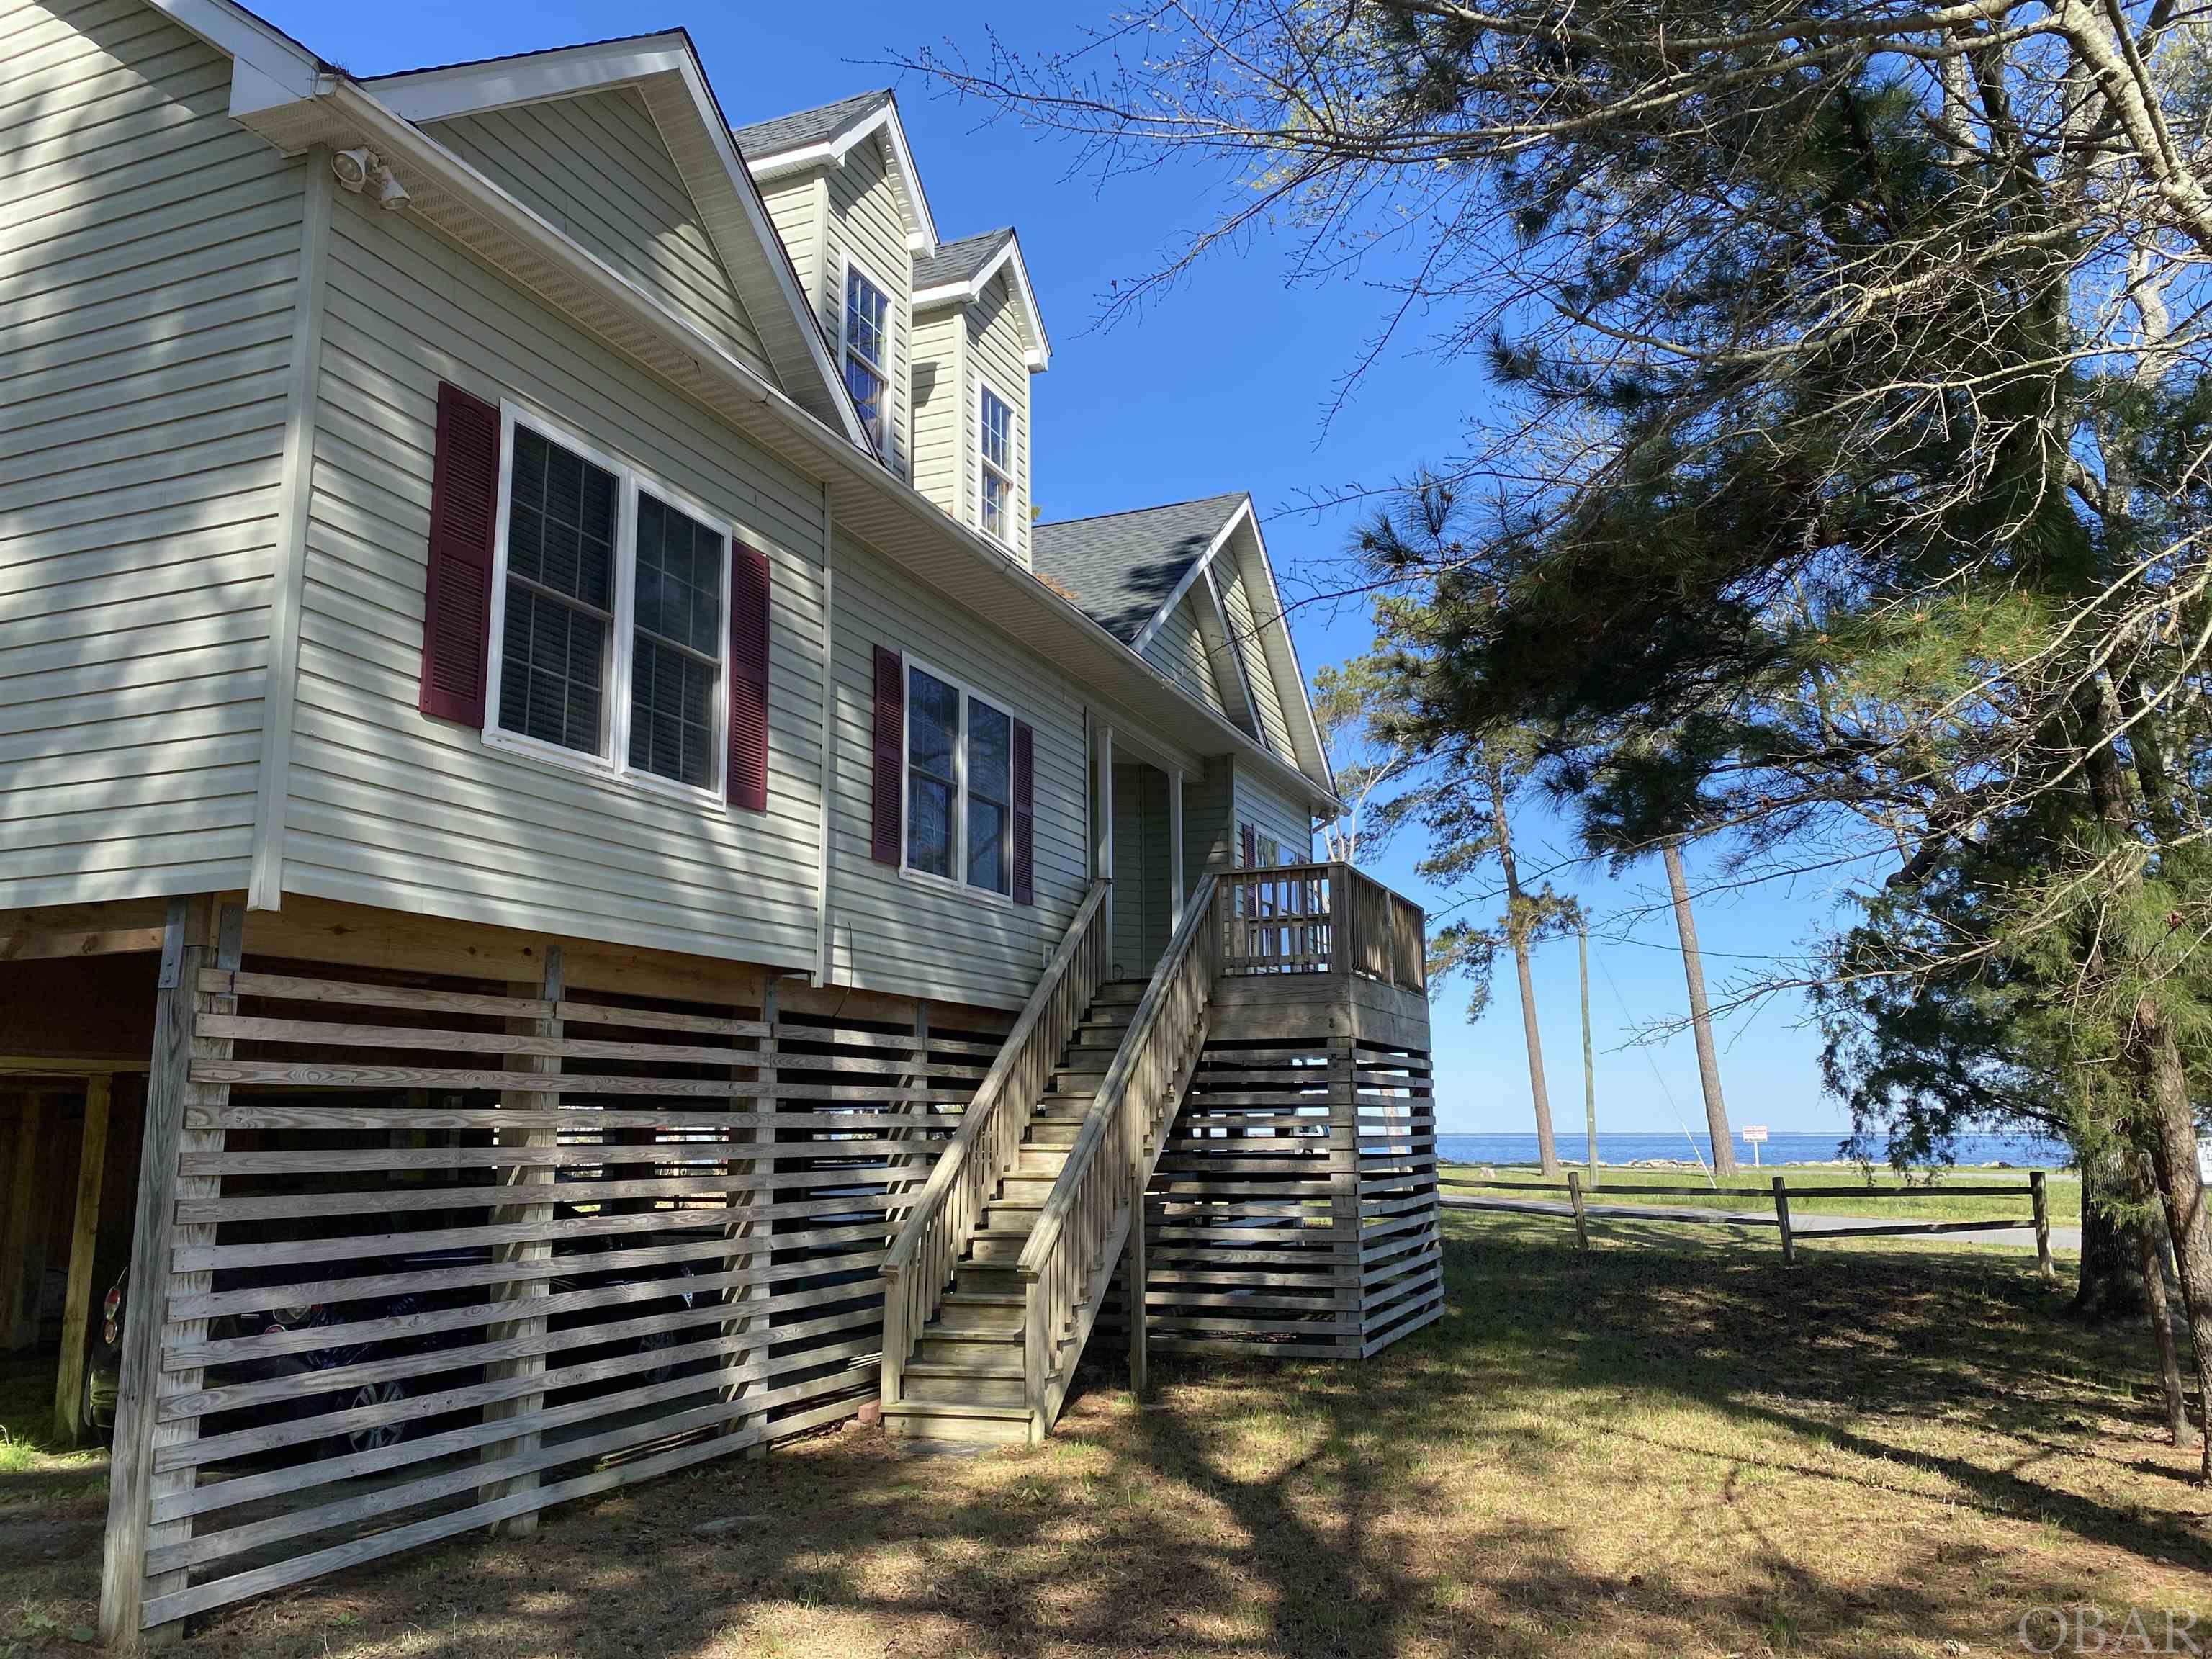 Spectacular Sound Views at this Semi-Waterfront Home near the Outer Banks!  Enjoy water views from every room (except the laundry room). Located less than 1 hour from the white sandy beaches of the Outer Banks, 45 minutes to Manteo, and 10 minutes to downtown Columbia, NC. This spacious modular home will make a great primary residence or a second home that is away from the hustle and bustle. The main level has three bedrooms and two full baths. The unfinished upstairs is ready for a huge bonus area with amazing water views. Sitting high and dry on pilings, with a dry entrance makes unloading the car is a breeze. Tyrrell county has amazing fishing, hunting, animal watching, boating and other outdoor recreation opportunities as well as being home to the Pocosin Arts School of Fine Craft. This property is just behind the American Legion and has mostly unobstructed views of the Albemarle Sound. NEW; water heater, roof, HVAC. All appliances convey. So much to offer!